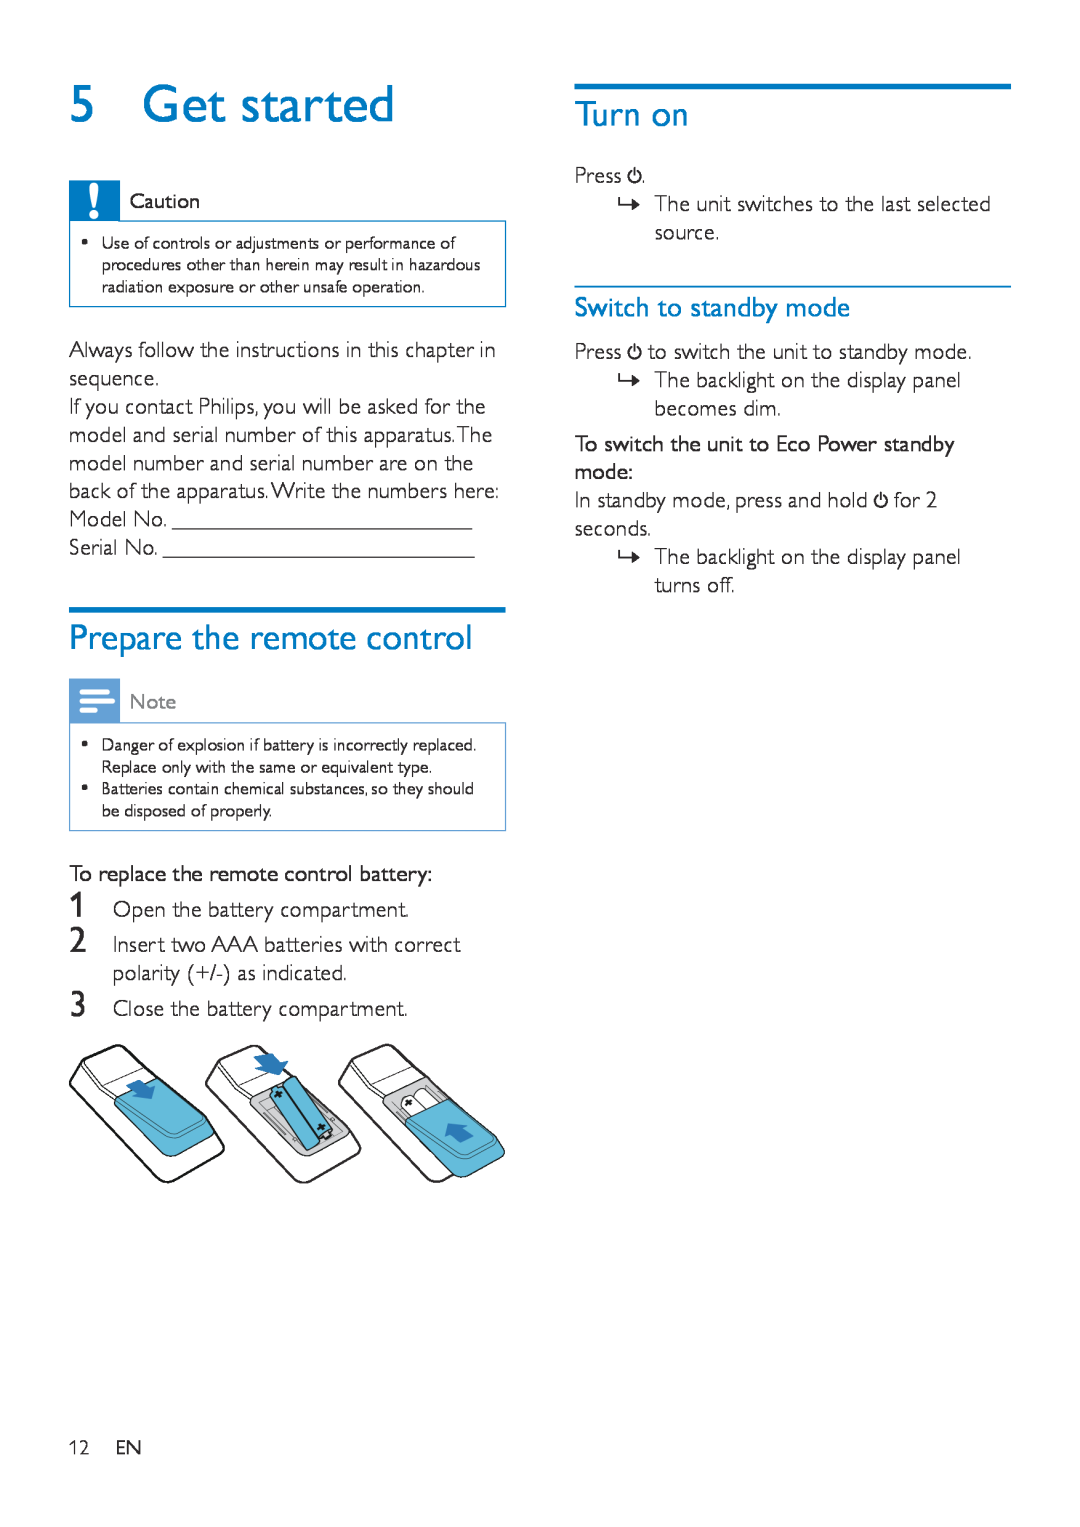 Philips NTRX500 user manual Get started, Prepare the remote control, Turn on, Switch to standby mode 